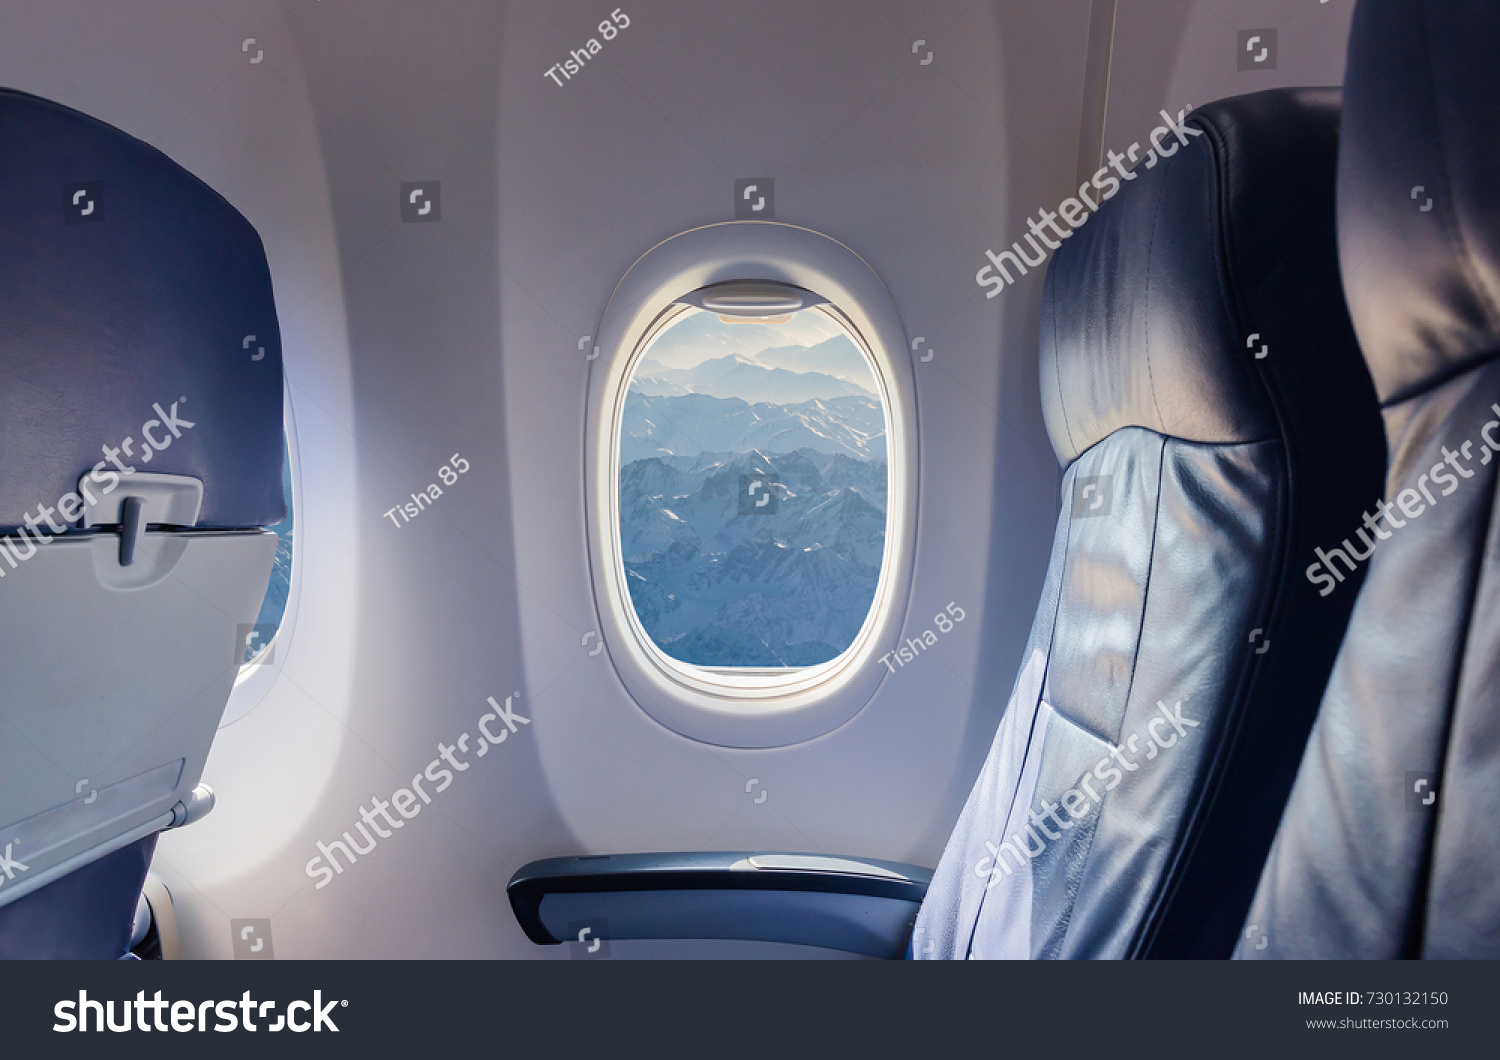 empty seat airplane and window view inside an aircraft #730132150